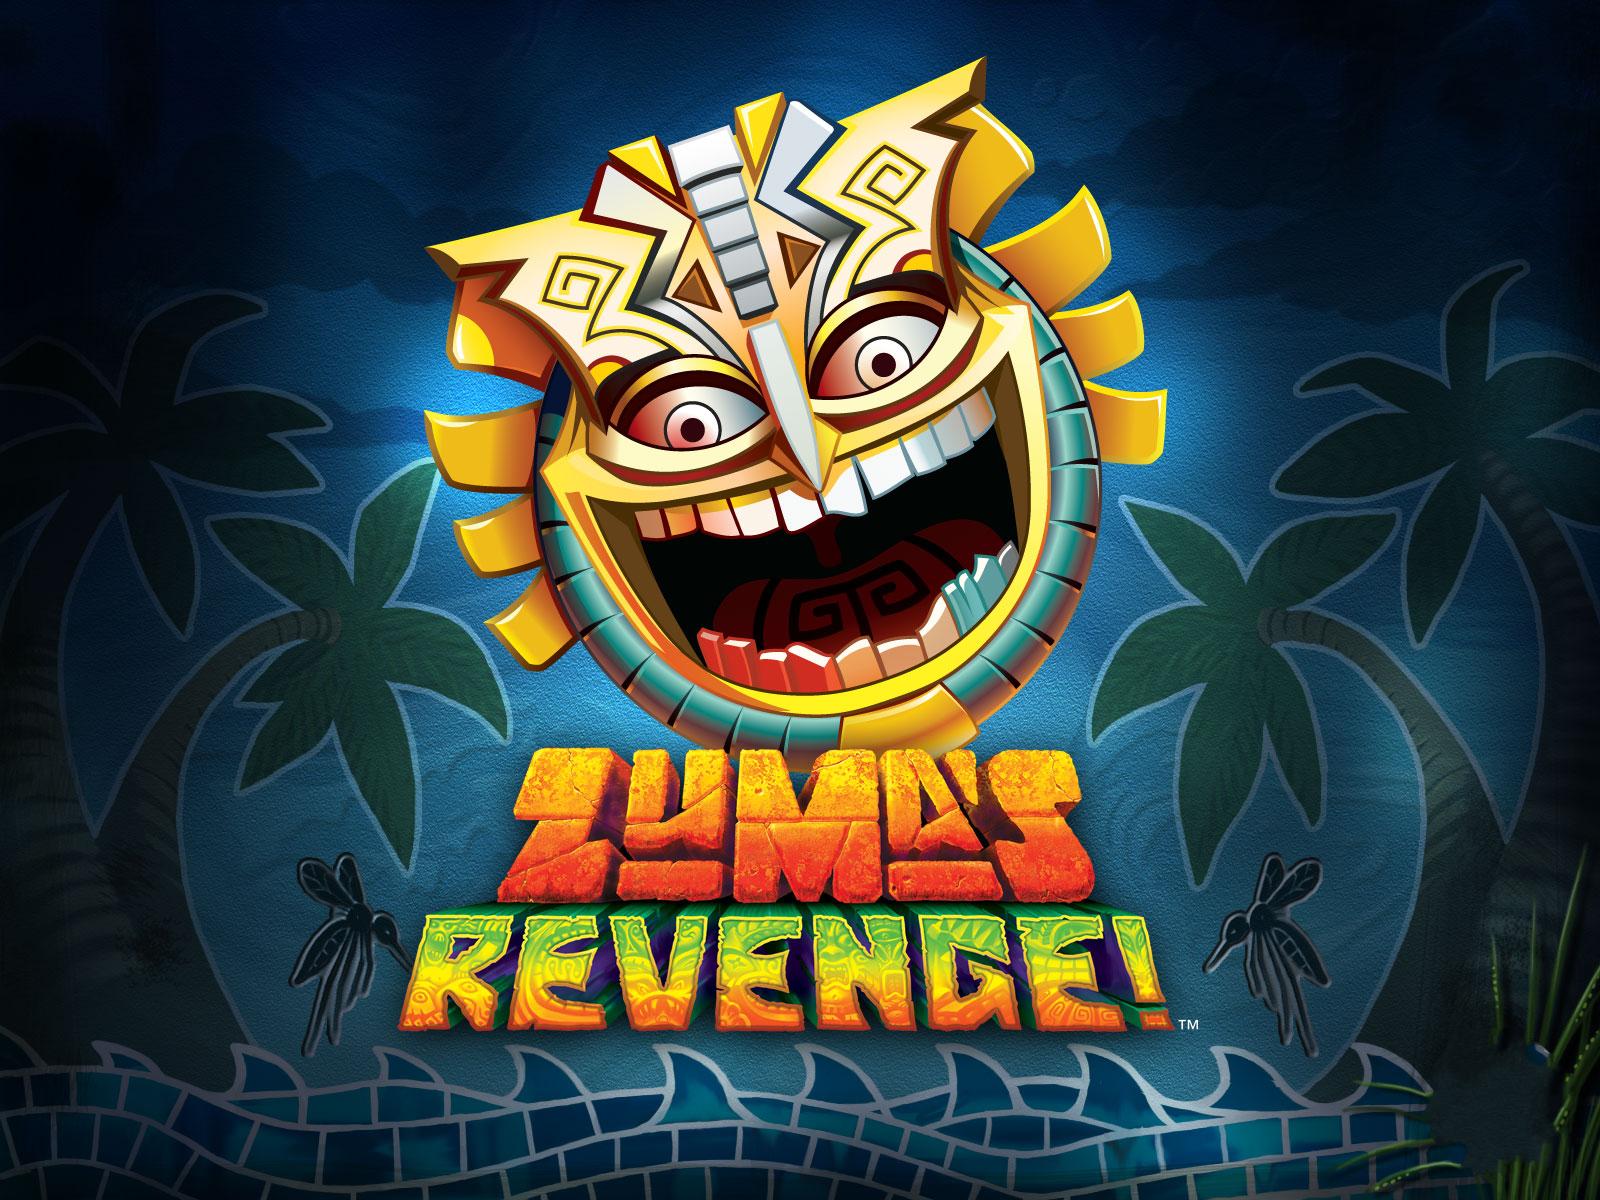 pictures-zymas-revenge-vdeo-game